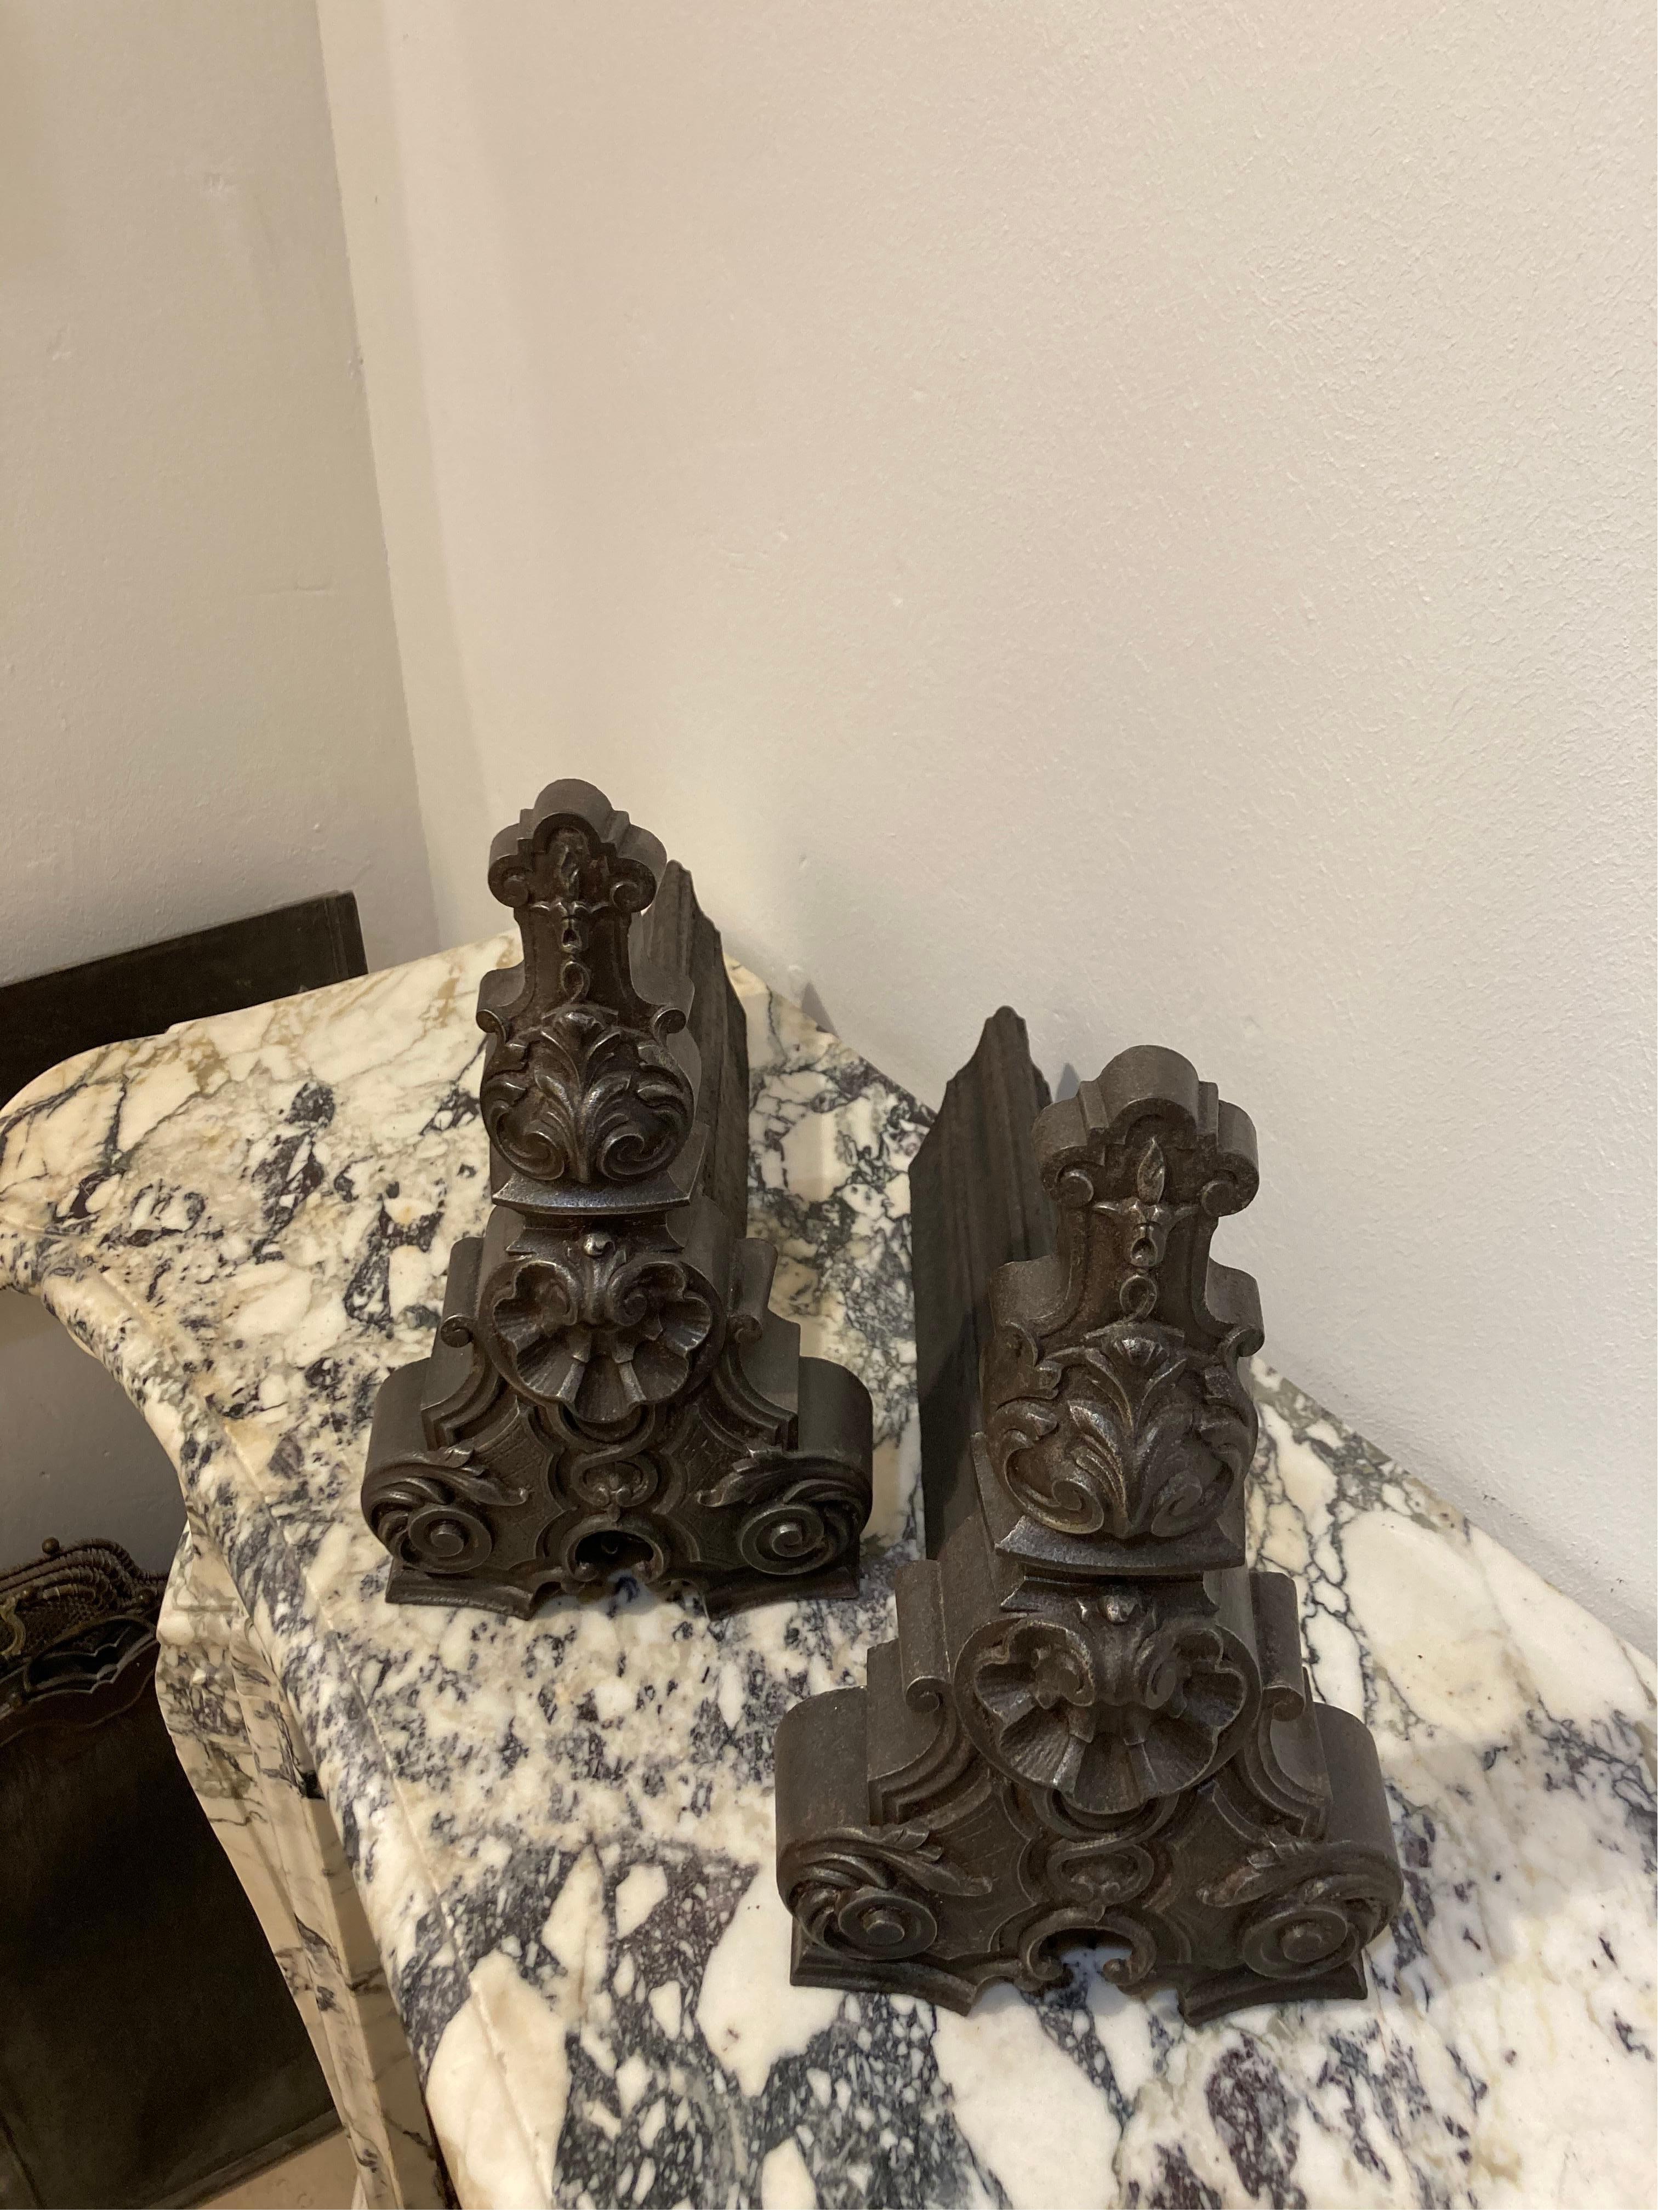 A nice and decorative pair of French andirons / fire dogs.
These hollow casted iron beauties are in lovely condition, with their perfect ratio they provide a nice filling statement in any modest sized hearth.

Sold by Schermerhorn Antique